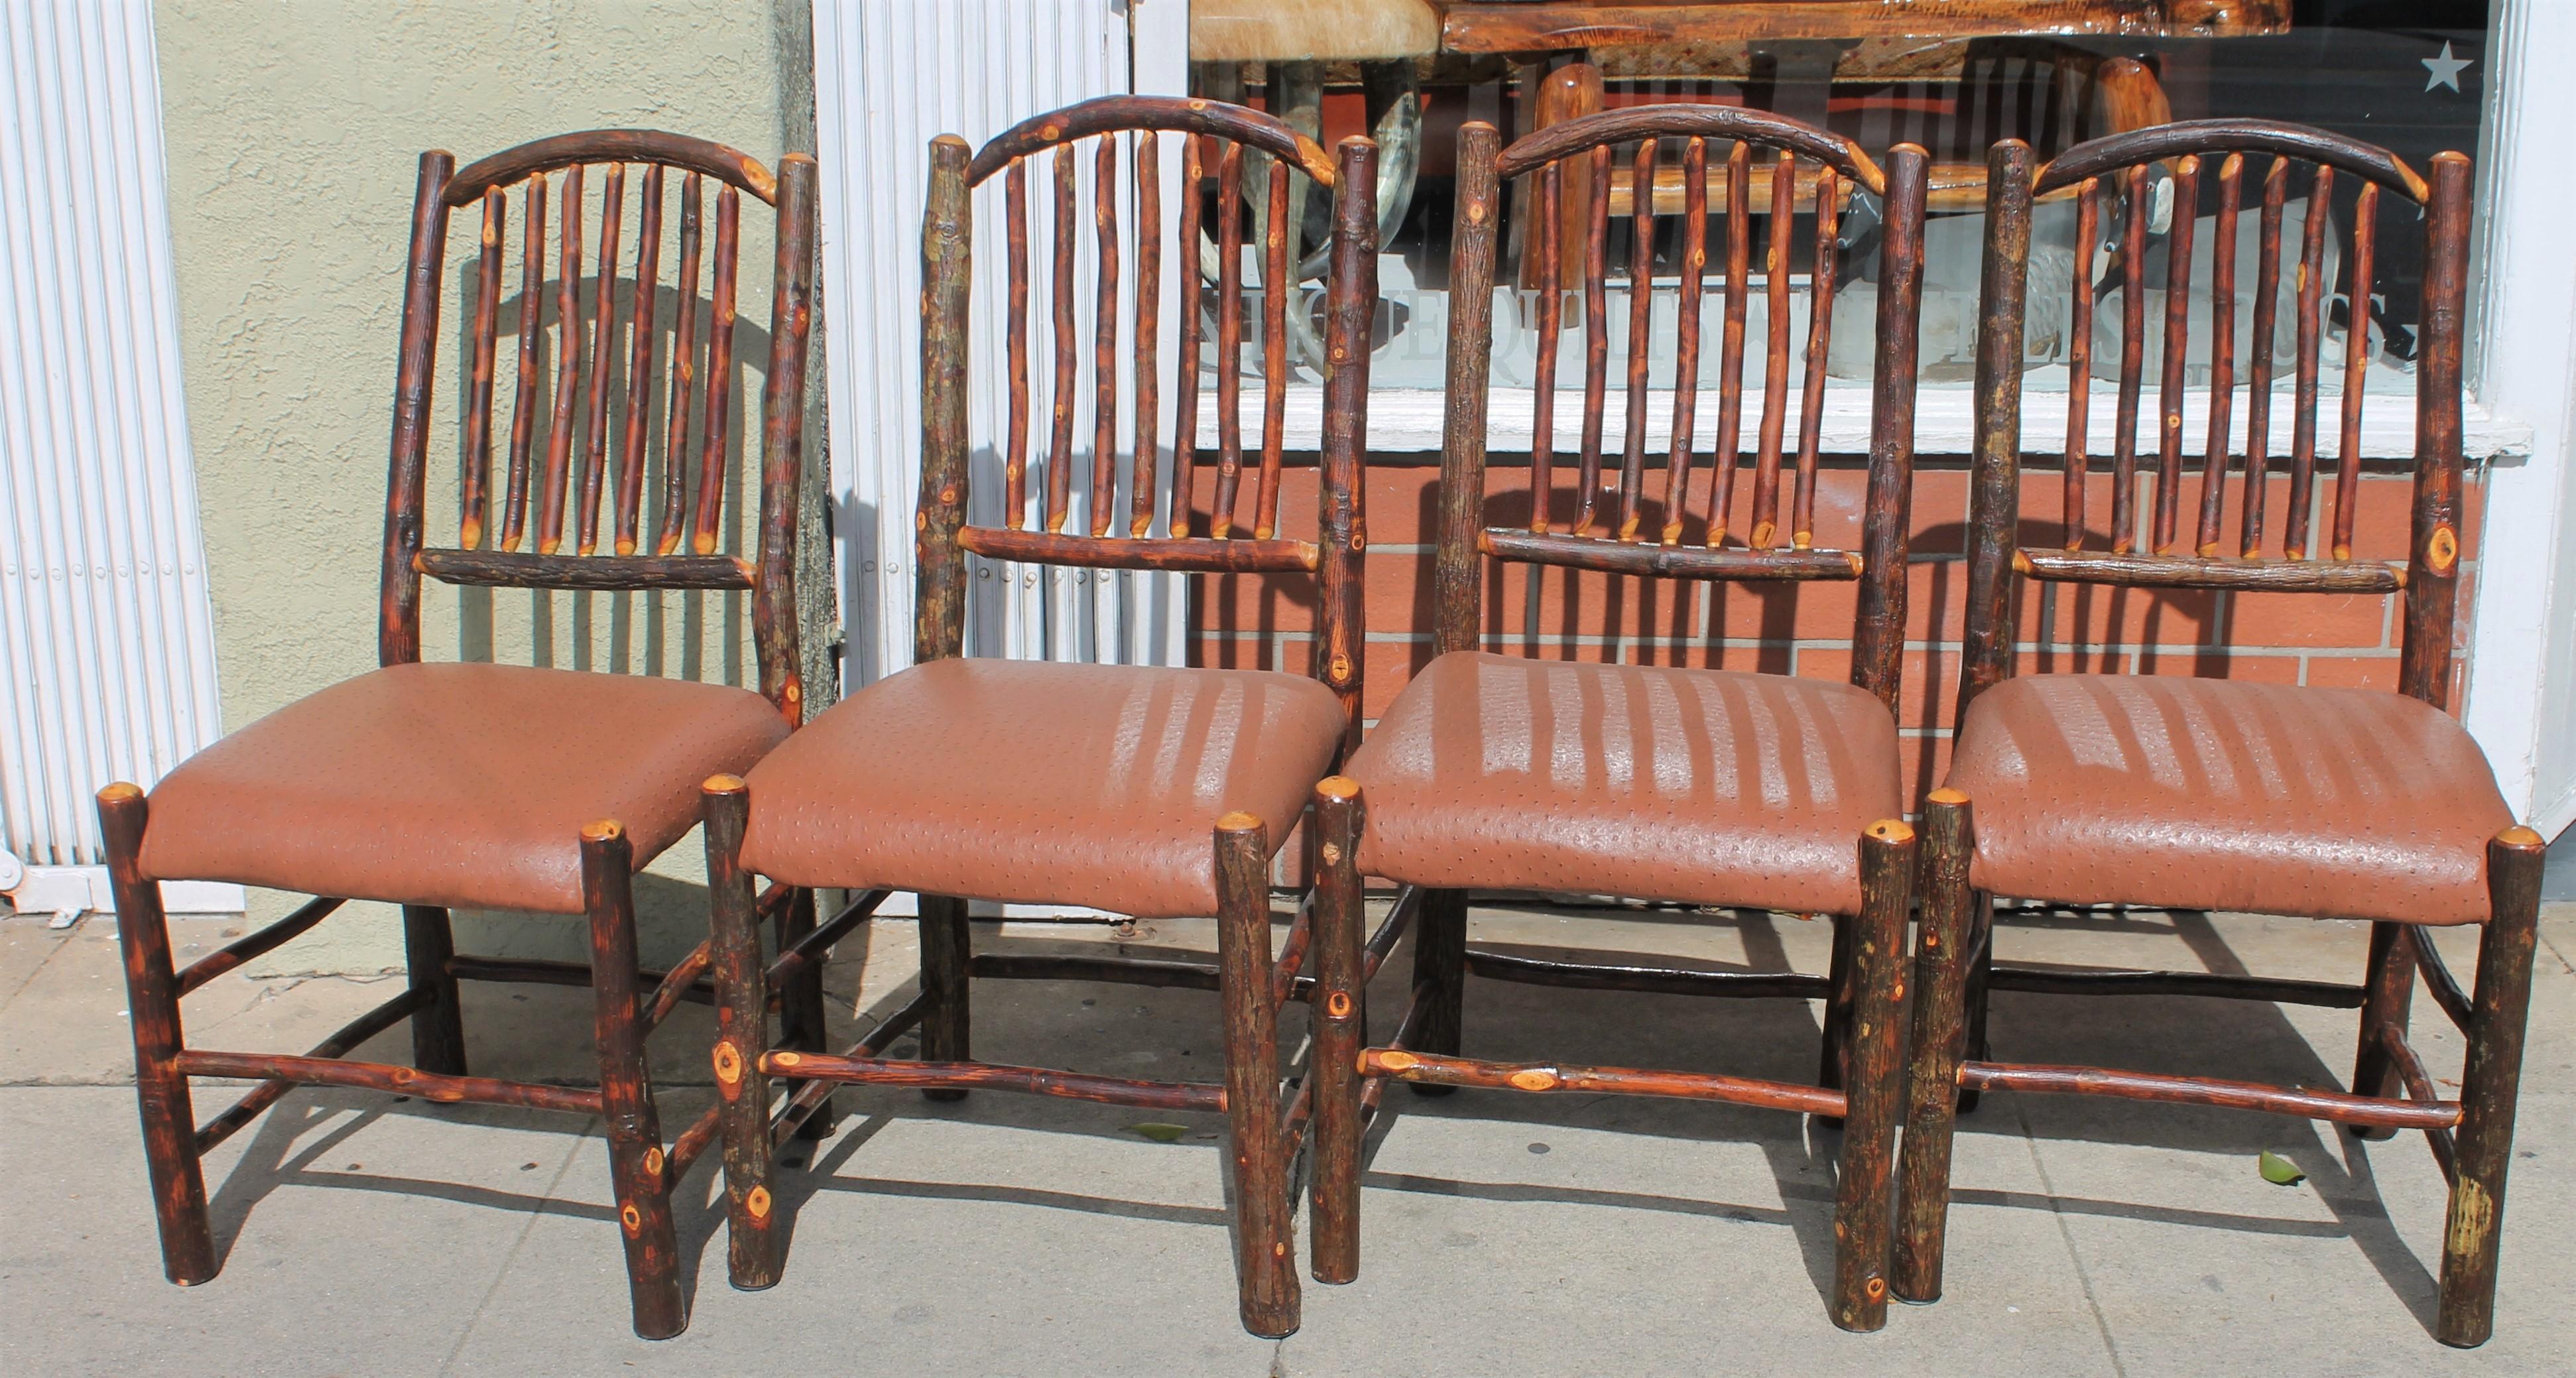 Old Hickory dinning chairs in fantastic condition. The upholstery is in a fo leather, i think man made. Condition is strong & sturdy.